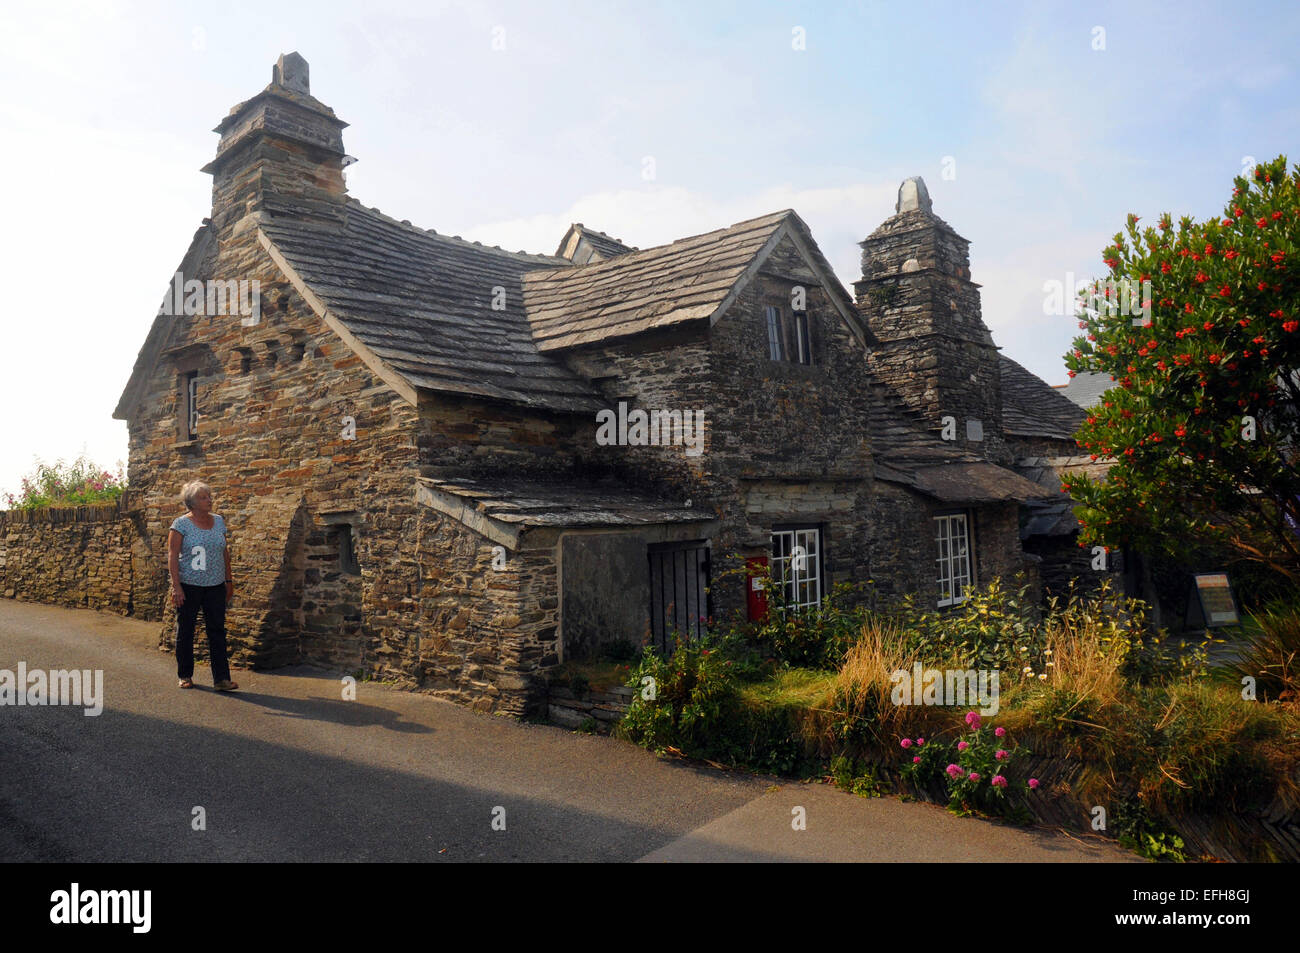 The Old Post Office, Tintagel, Cornwall Stockfoto